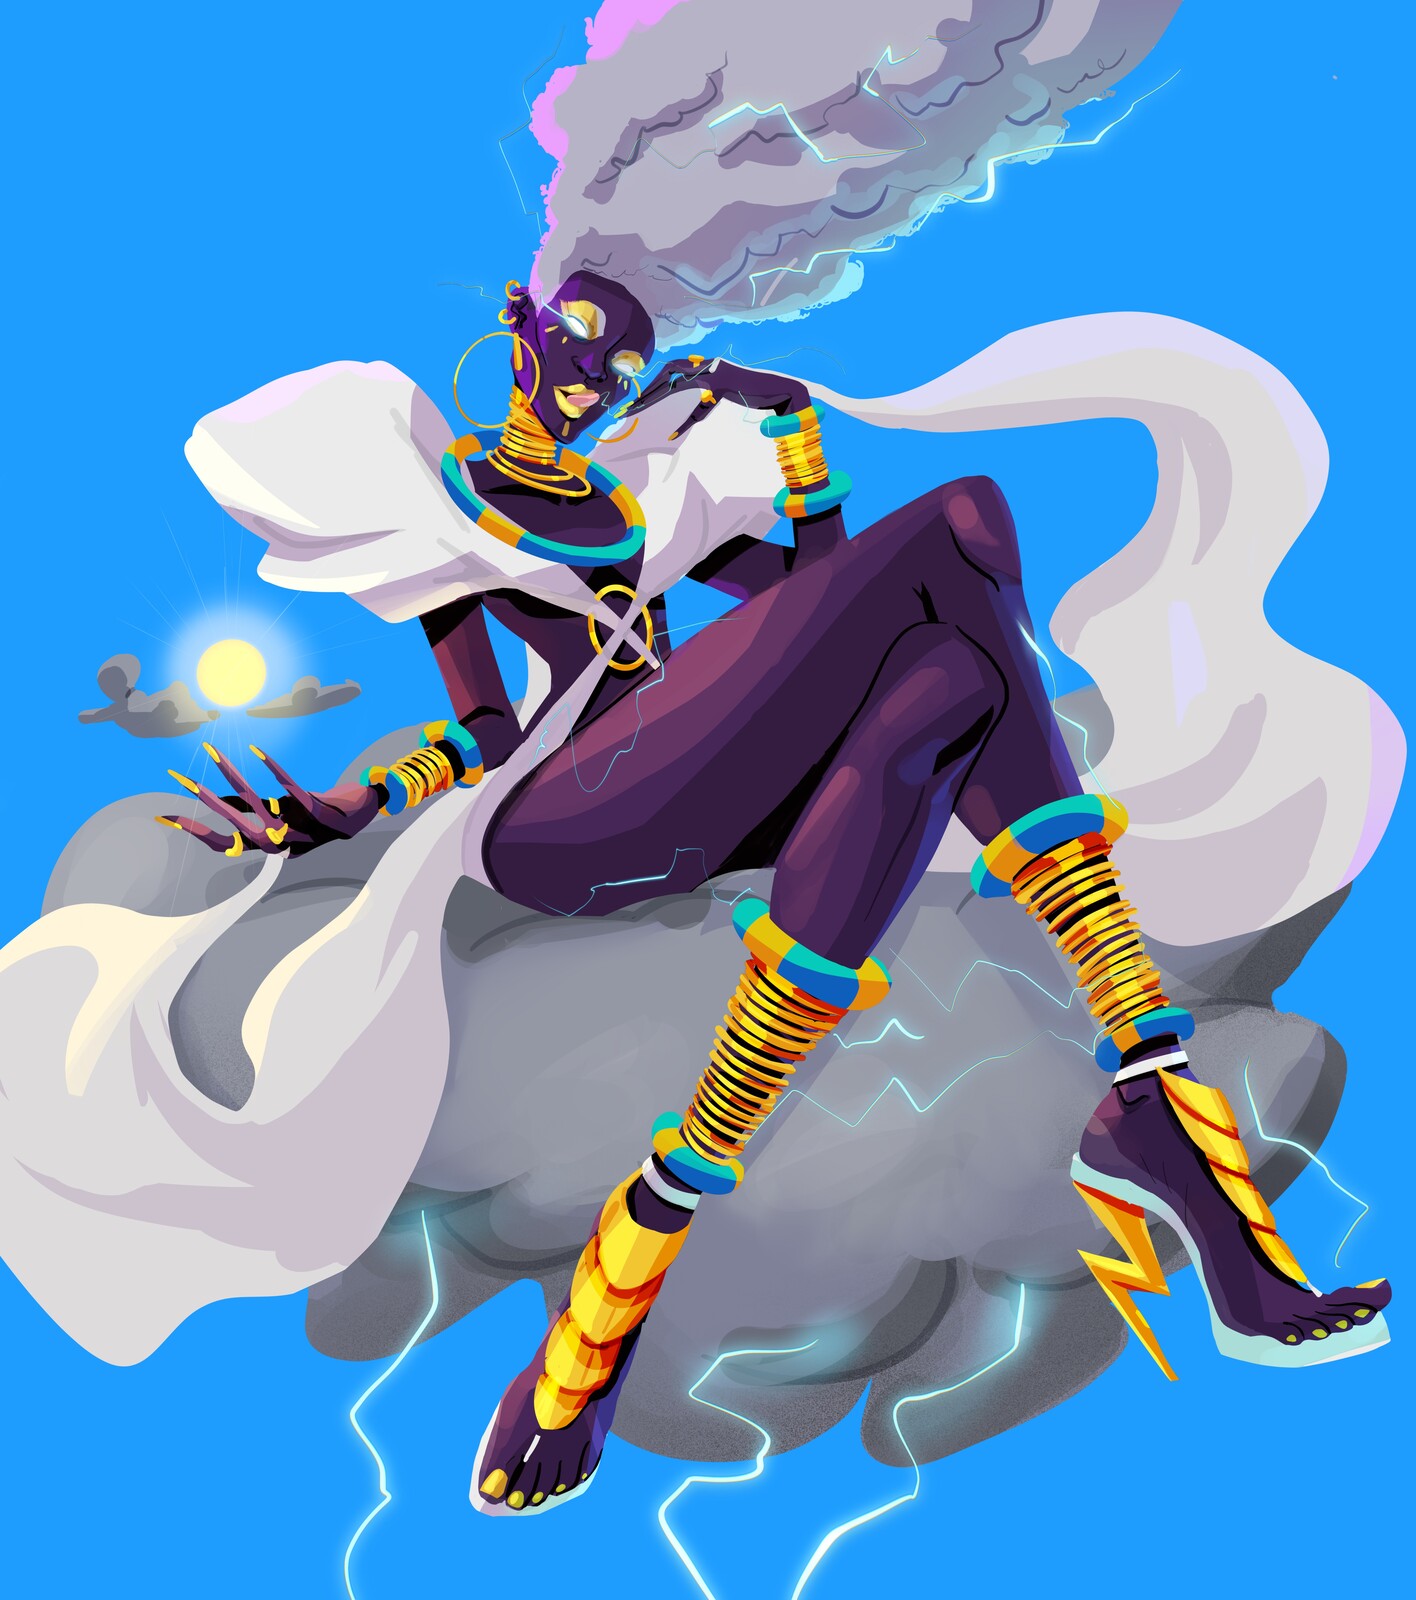 Storm, The Weather Goddess